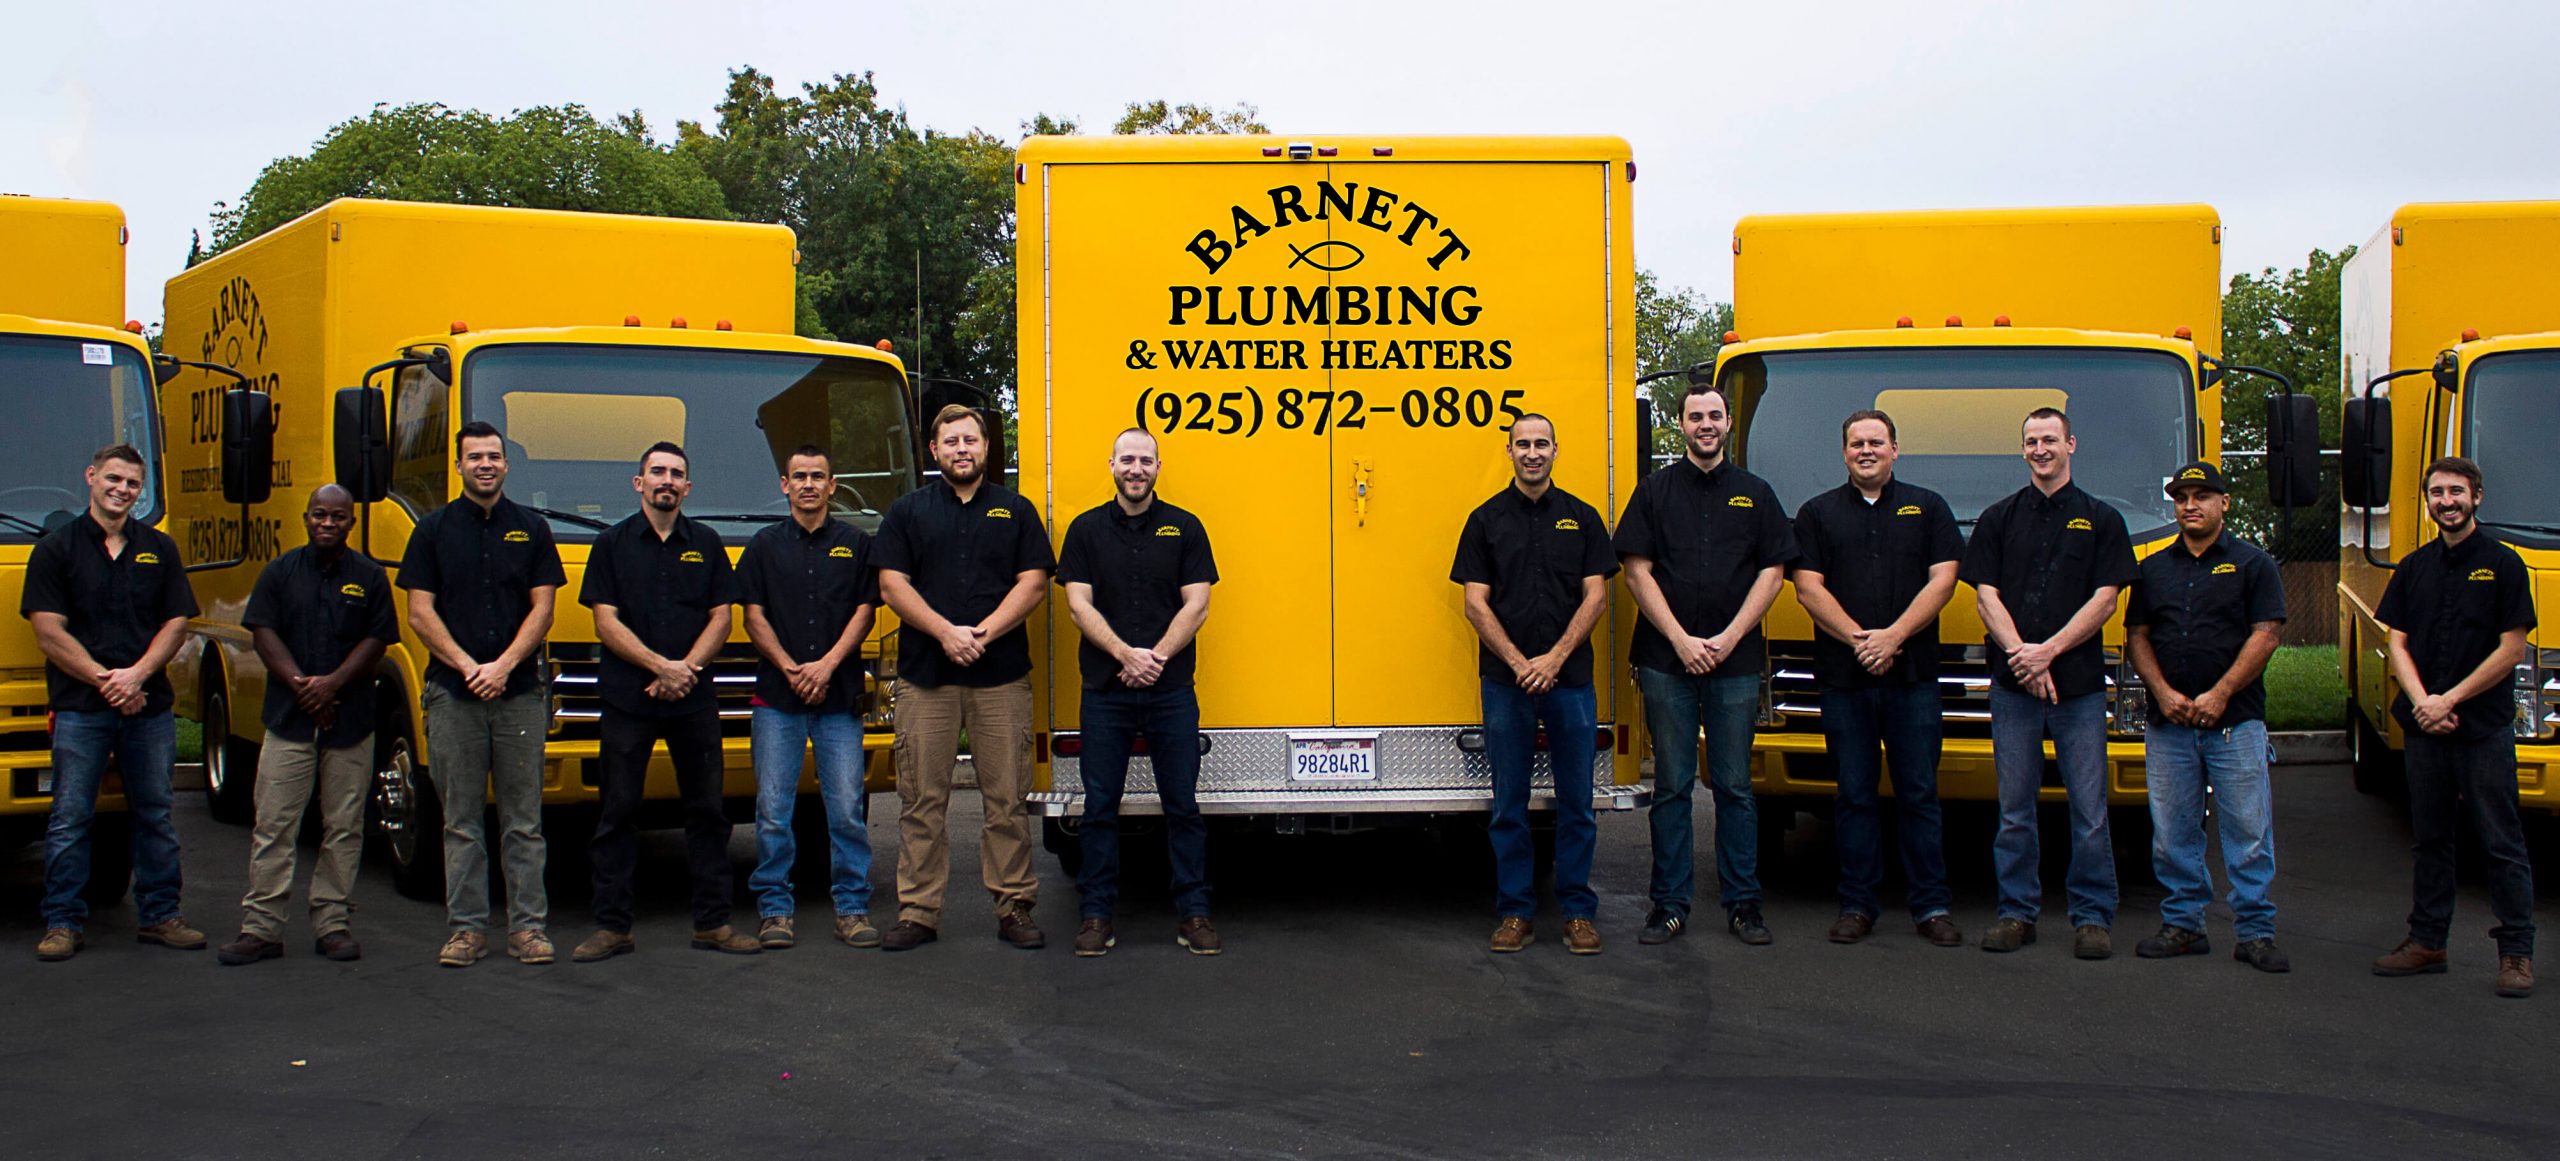 The Barnett Plumbing and Water Heaters team with work vehicles